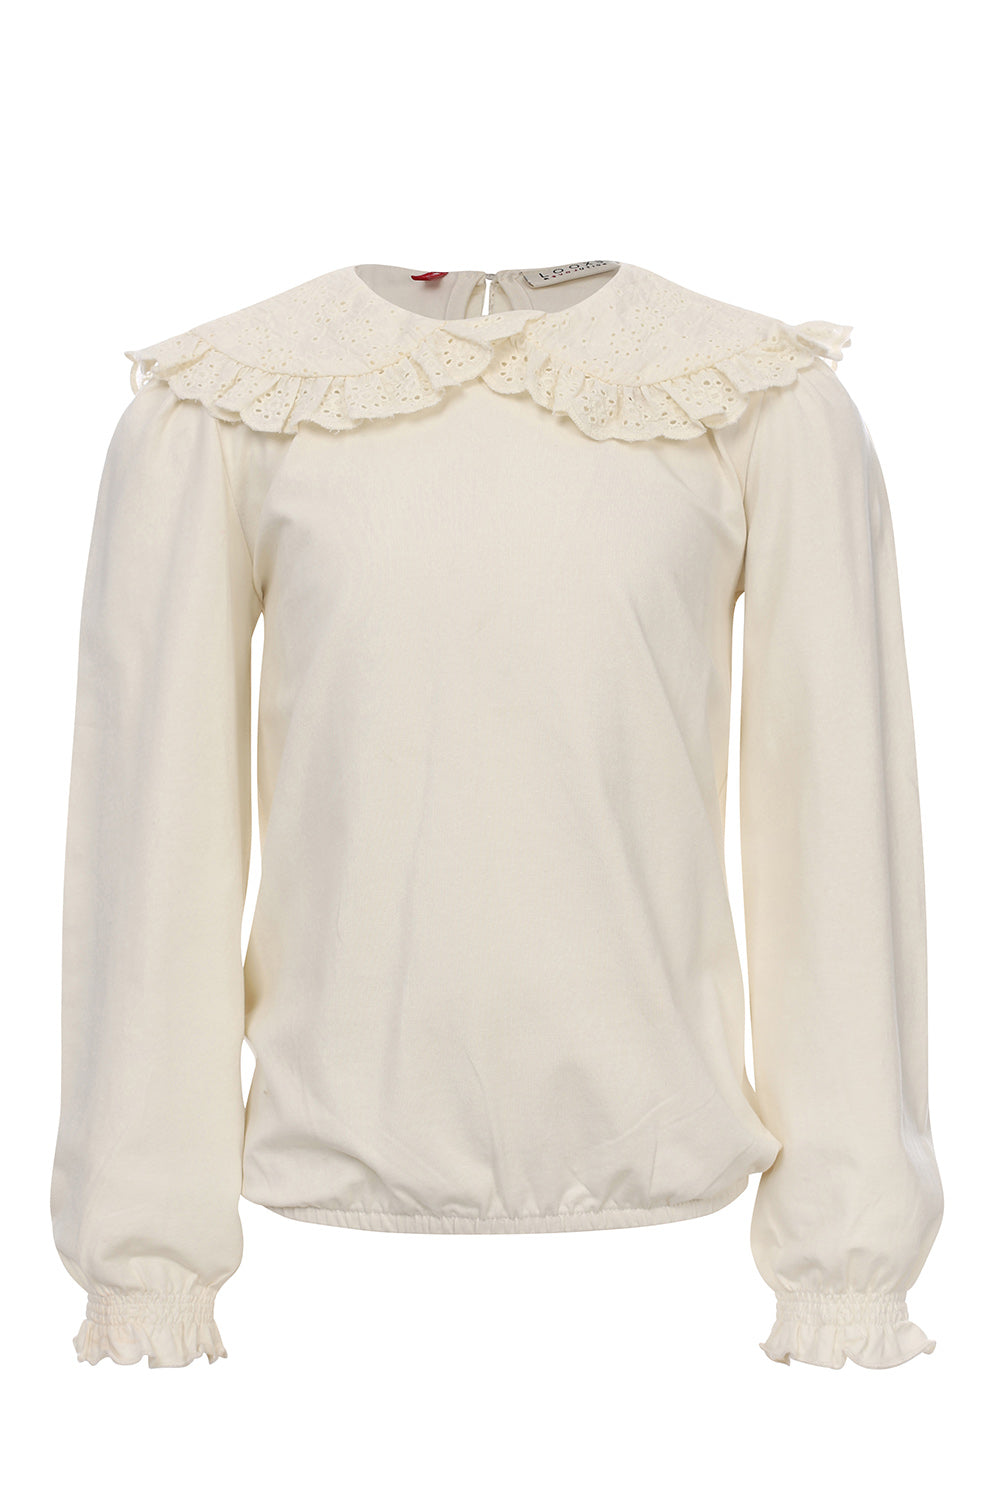 LOOXS Little Lace Collar Tee